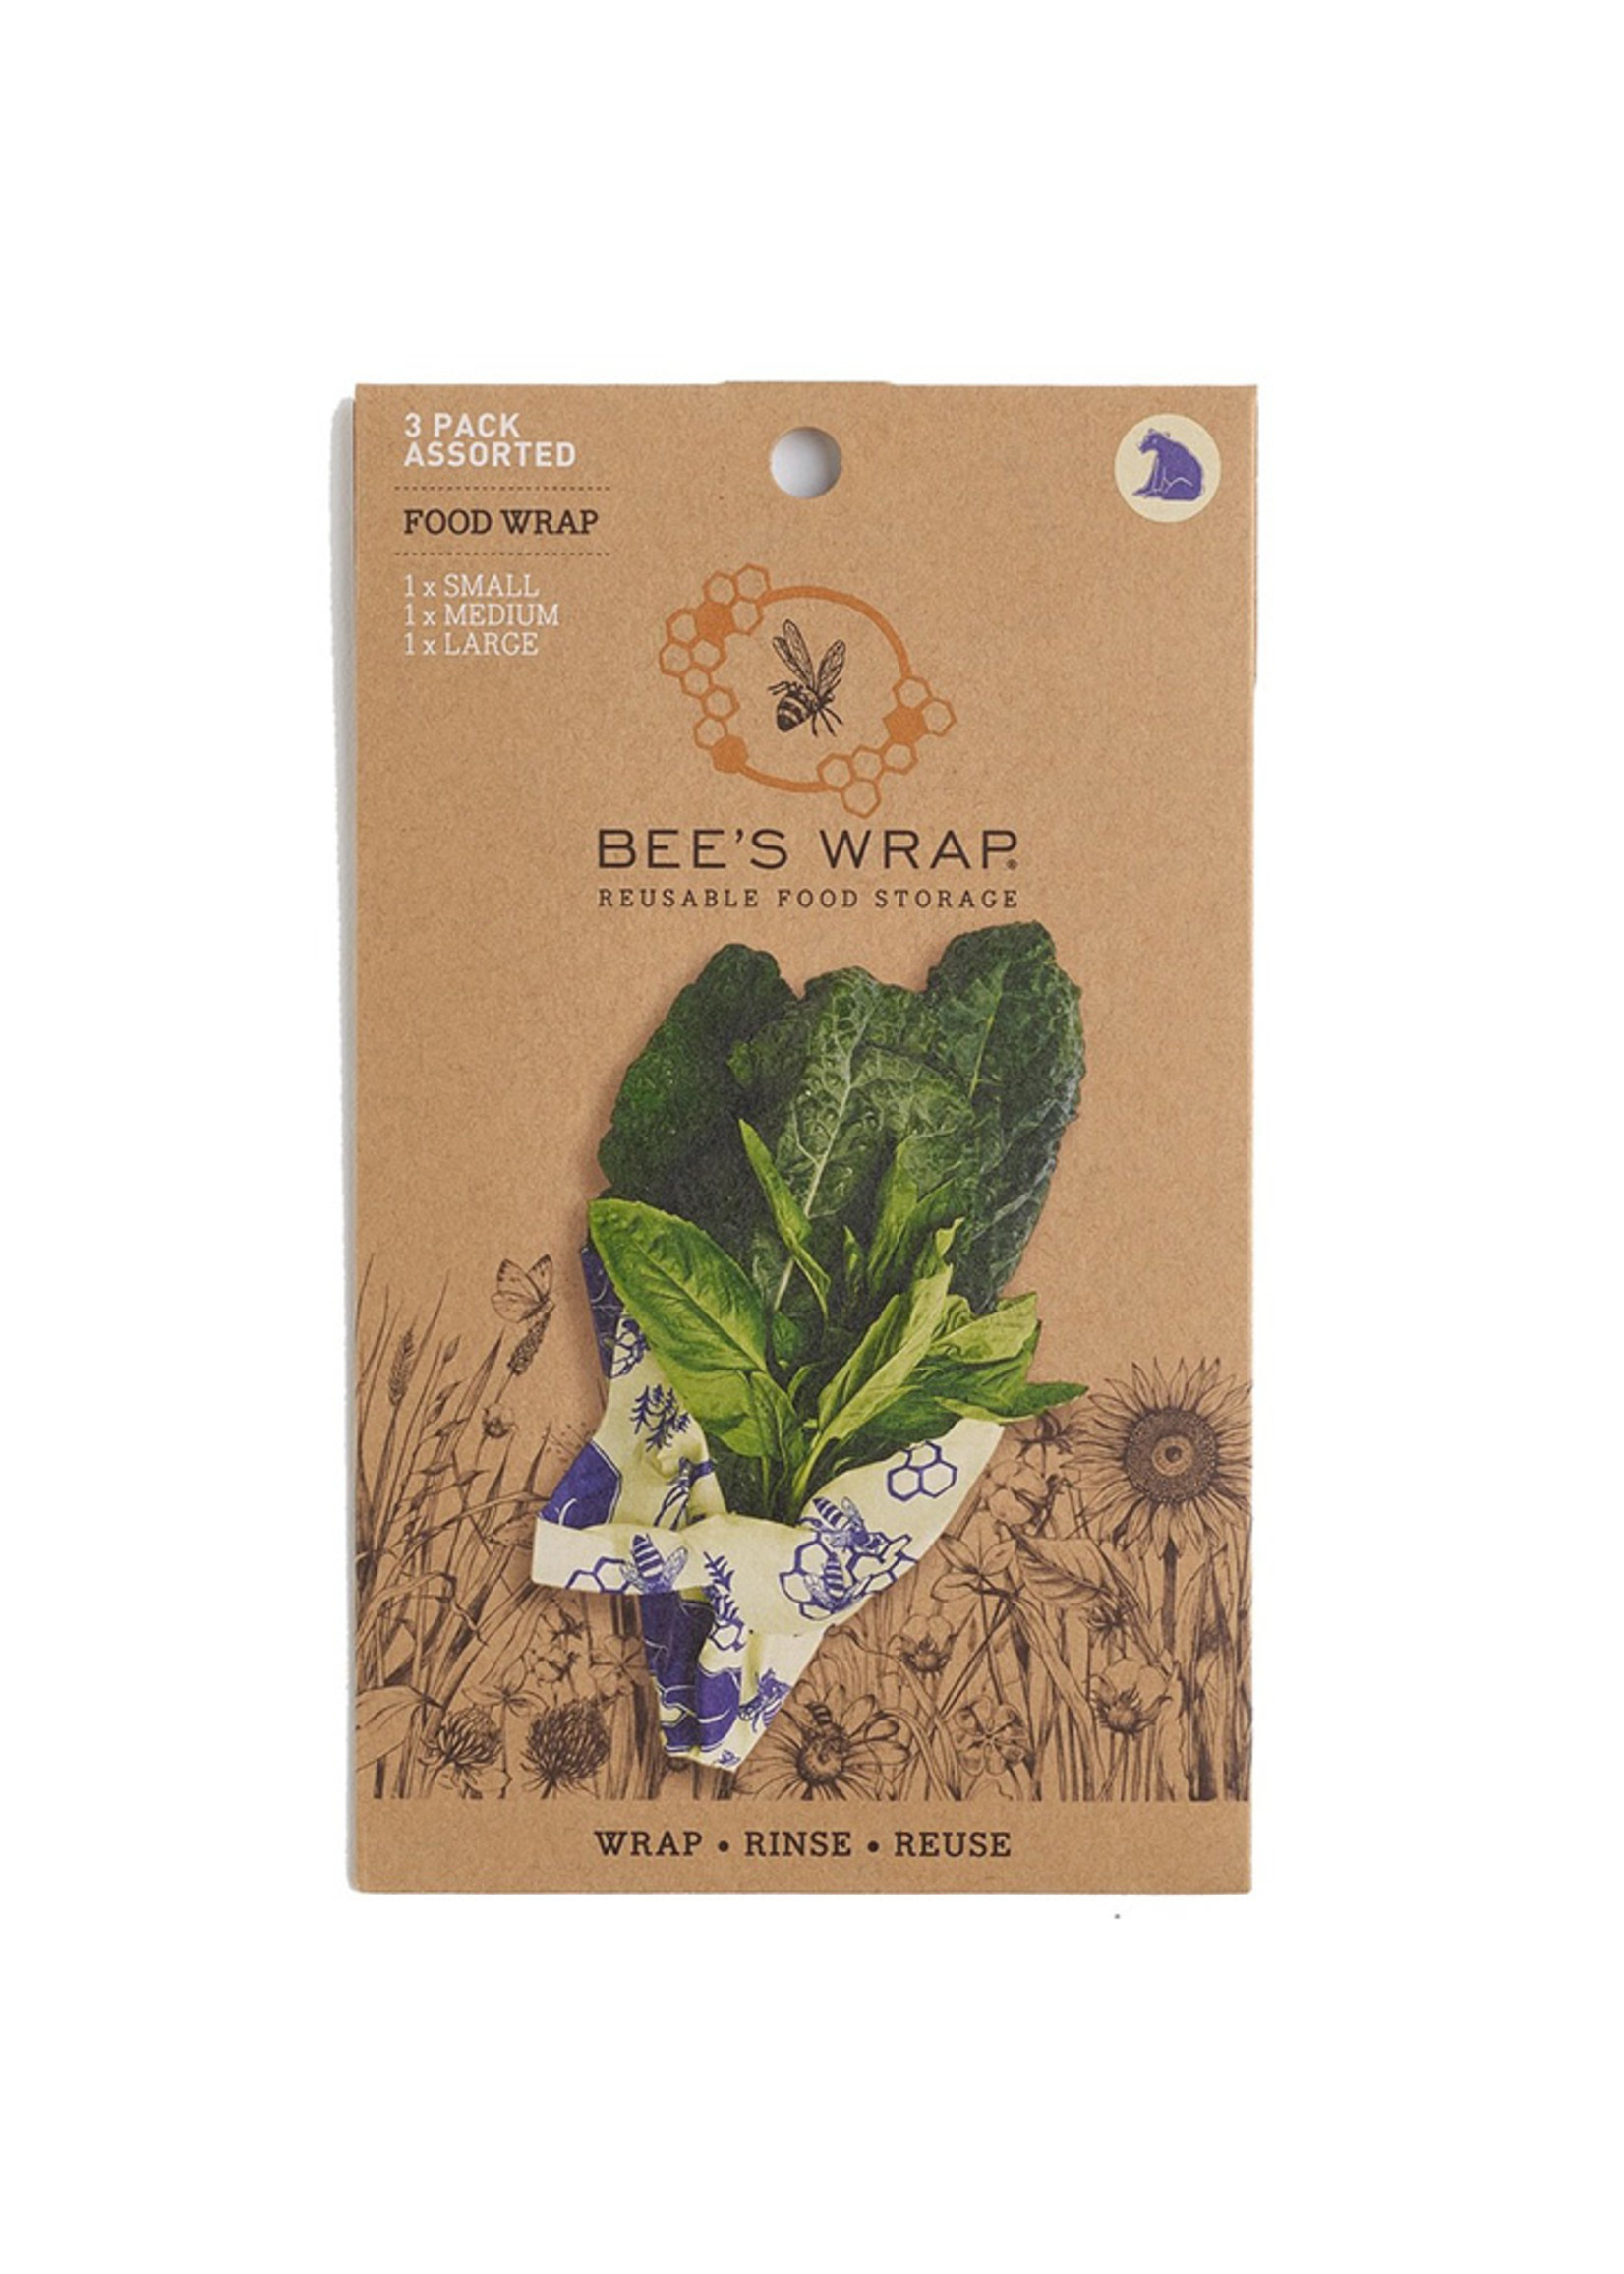 Bee's Wrap Bees and Bears Food Wrap Set of 3